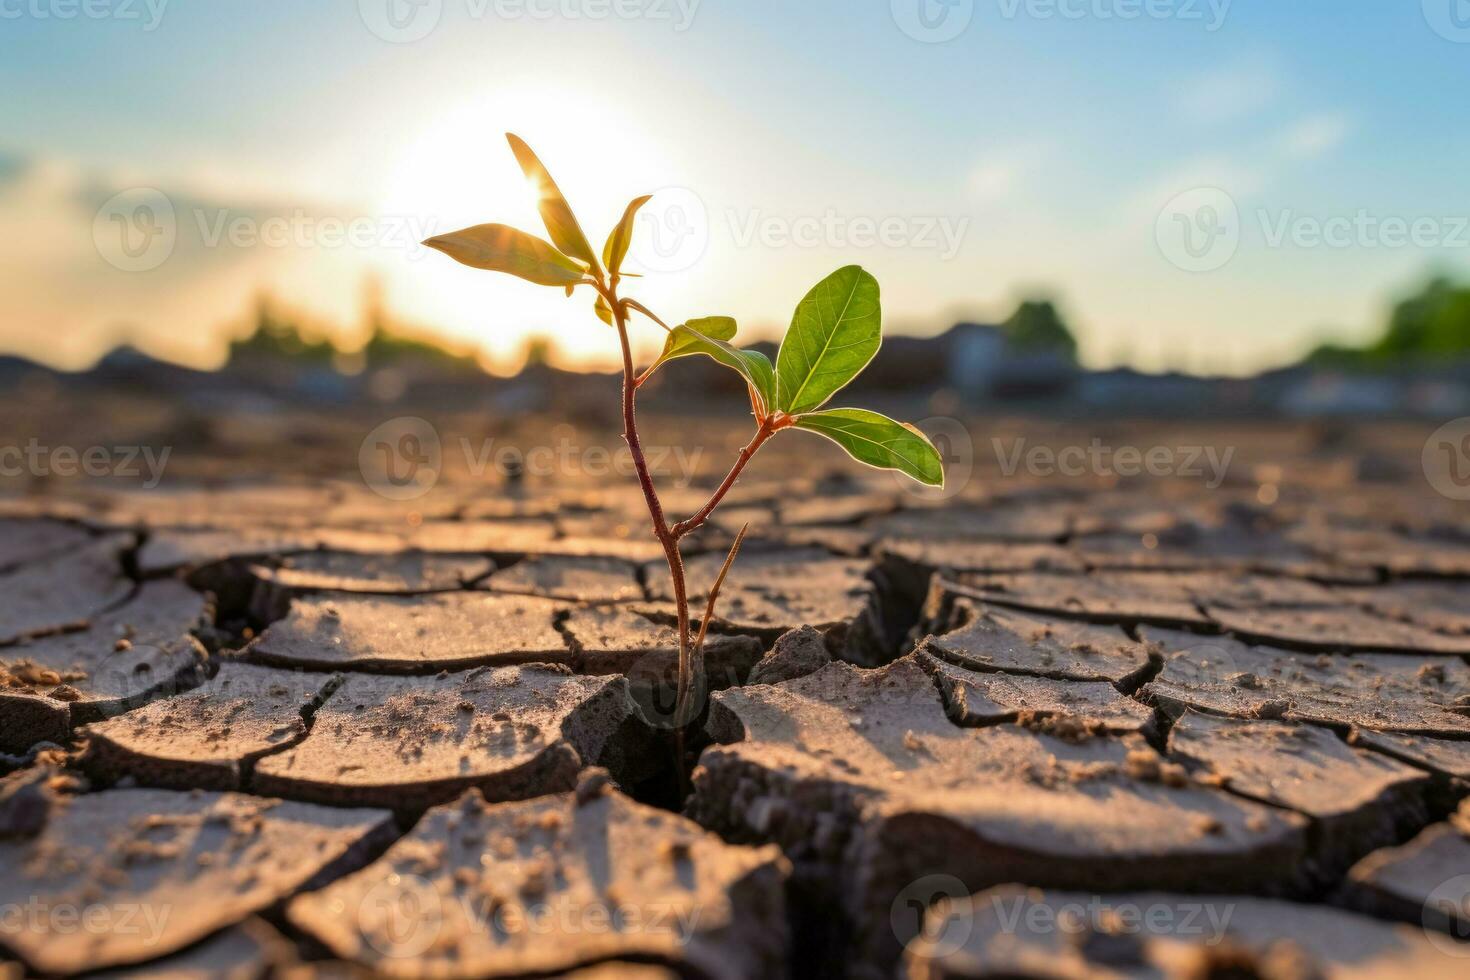 From drought to green growth the description of climate change photo